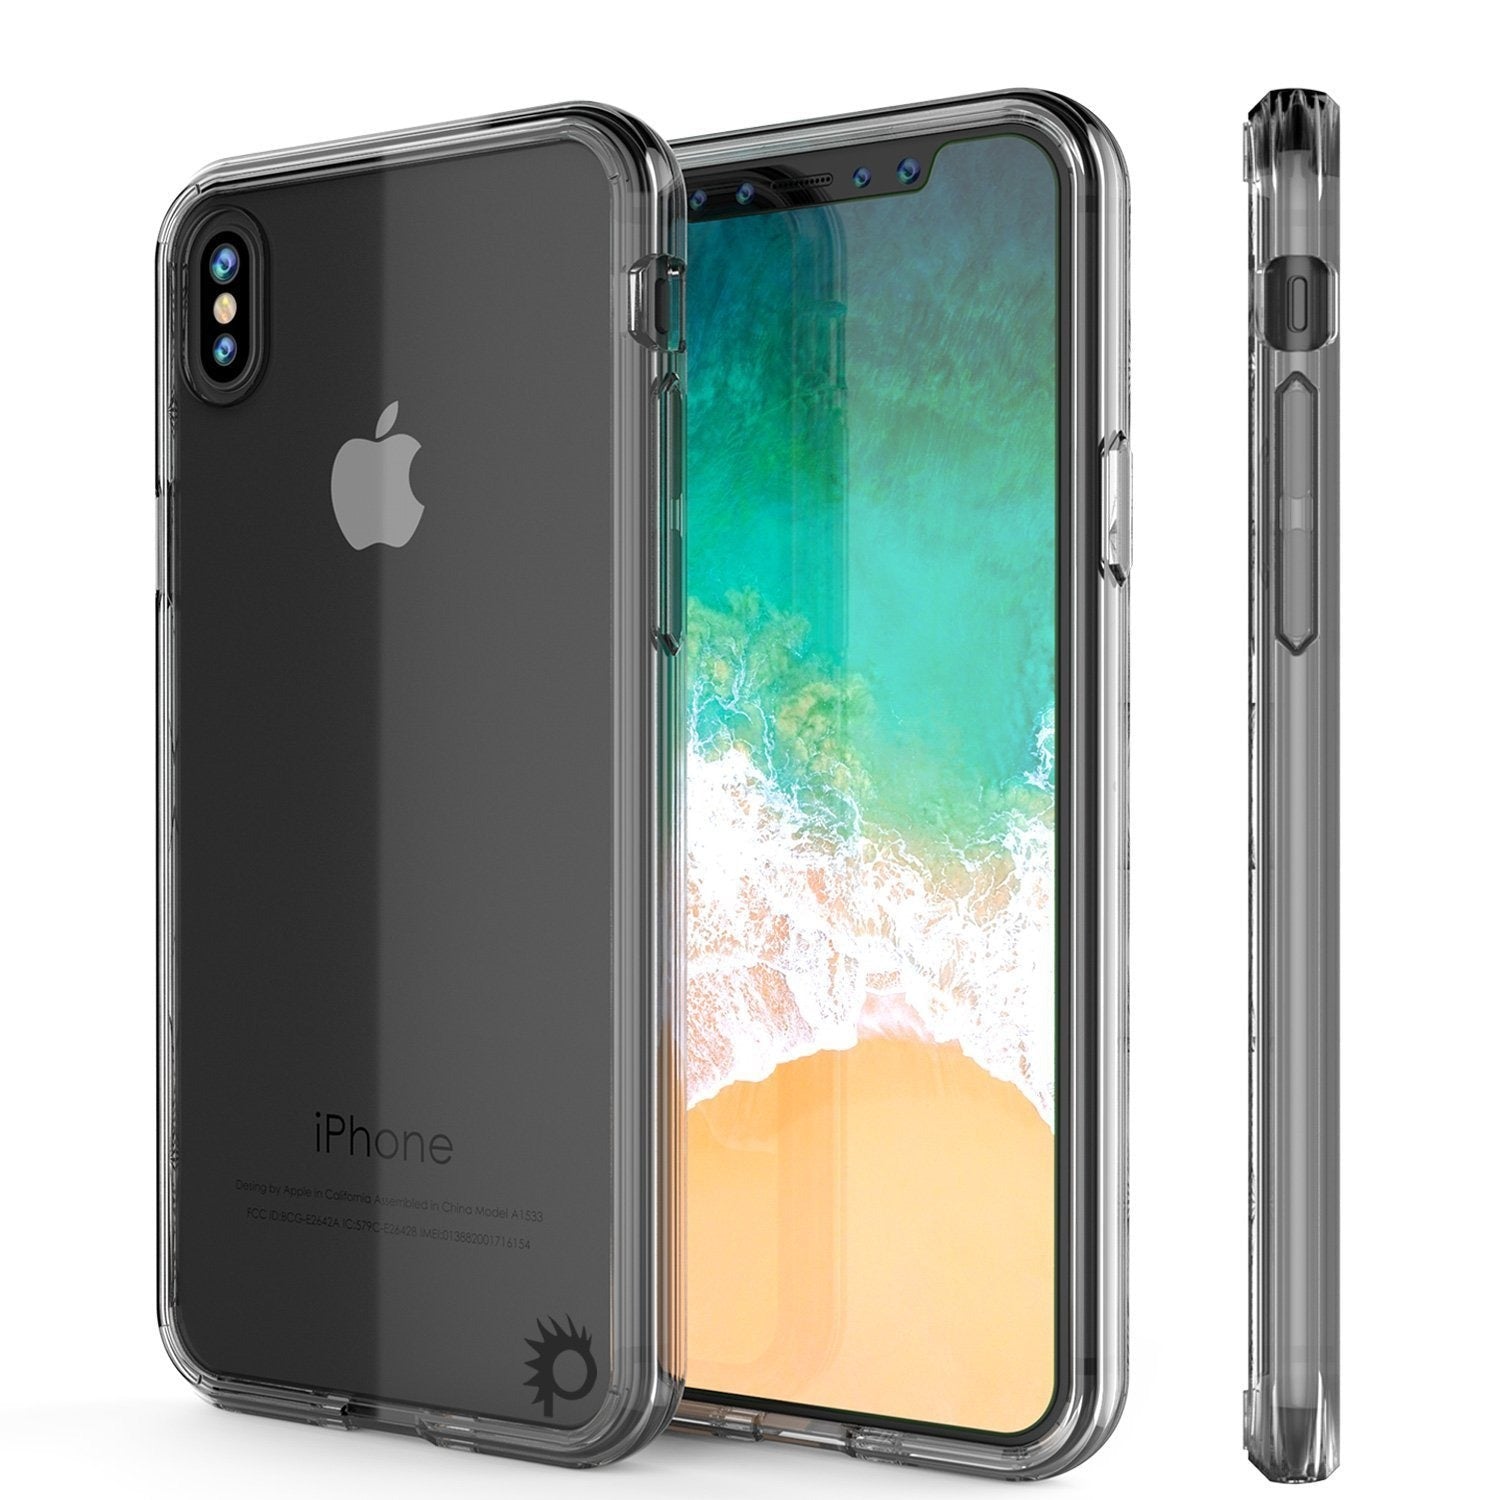 iPhone X Punkcase, [LUCID 2.0 Series] Slim Fit Dual Layer Cover, Clear